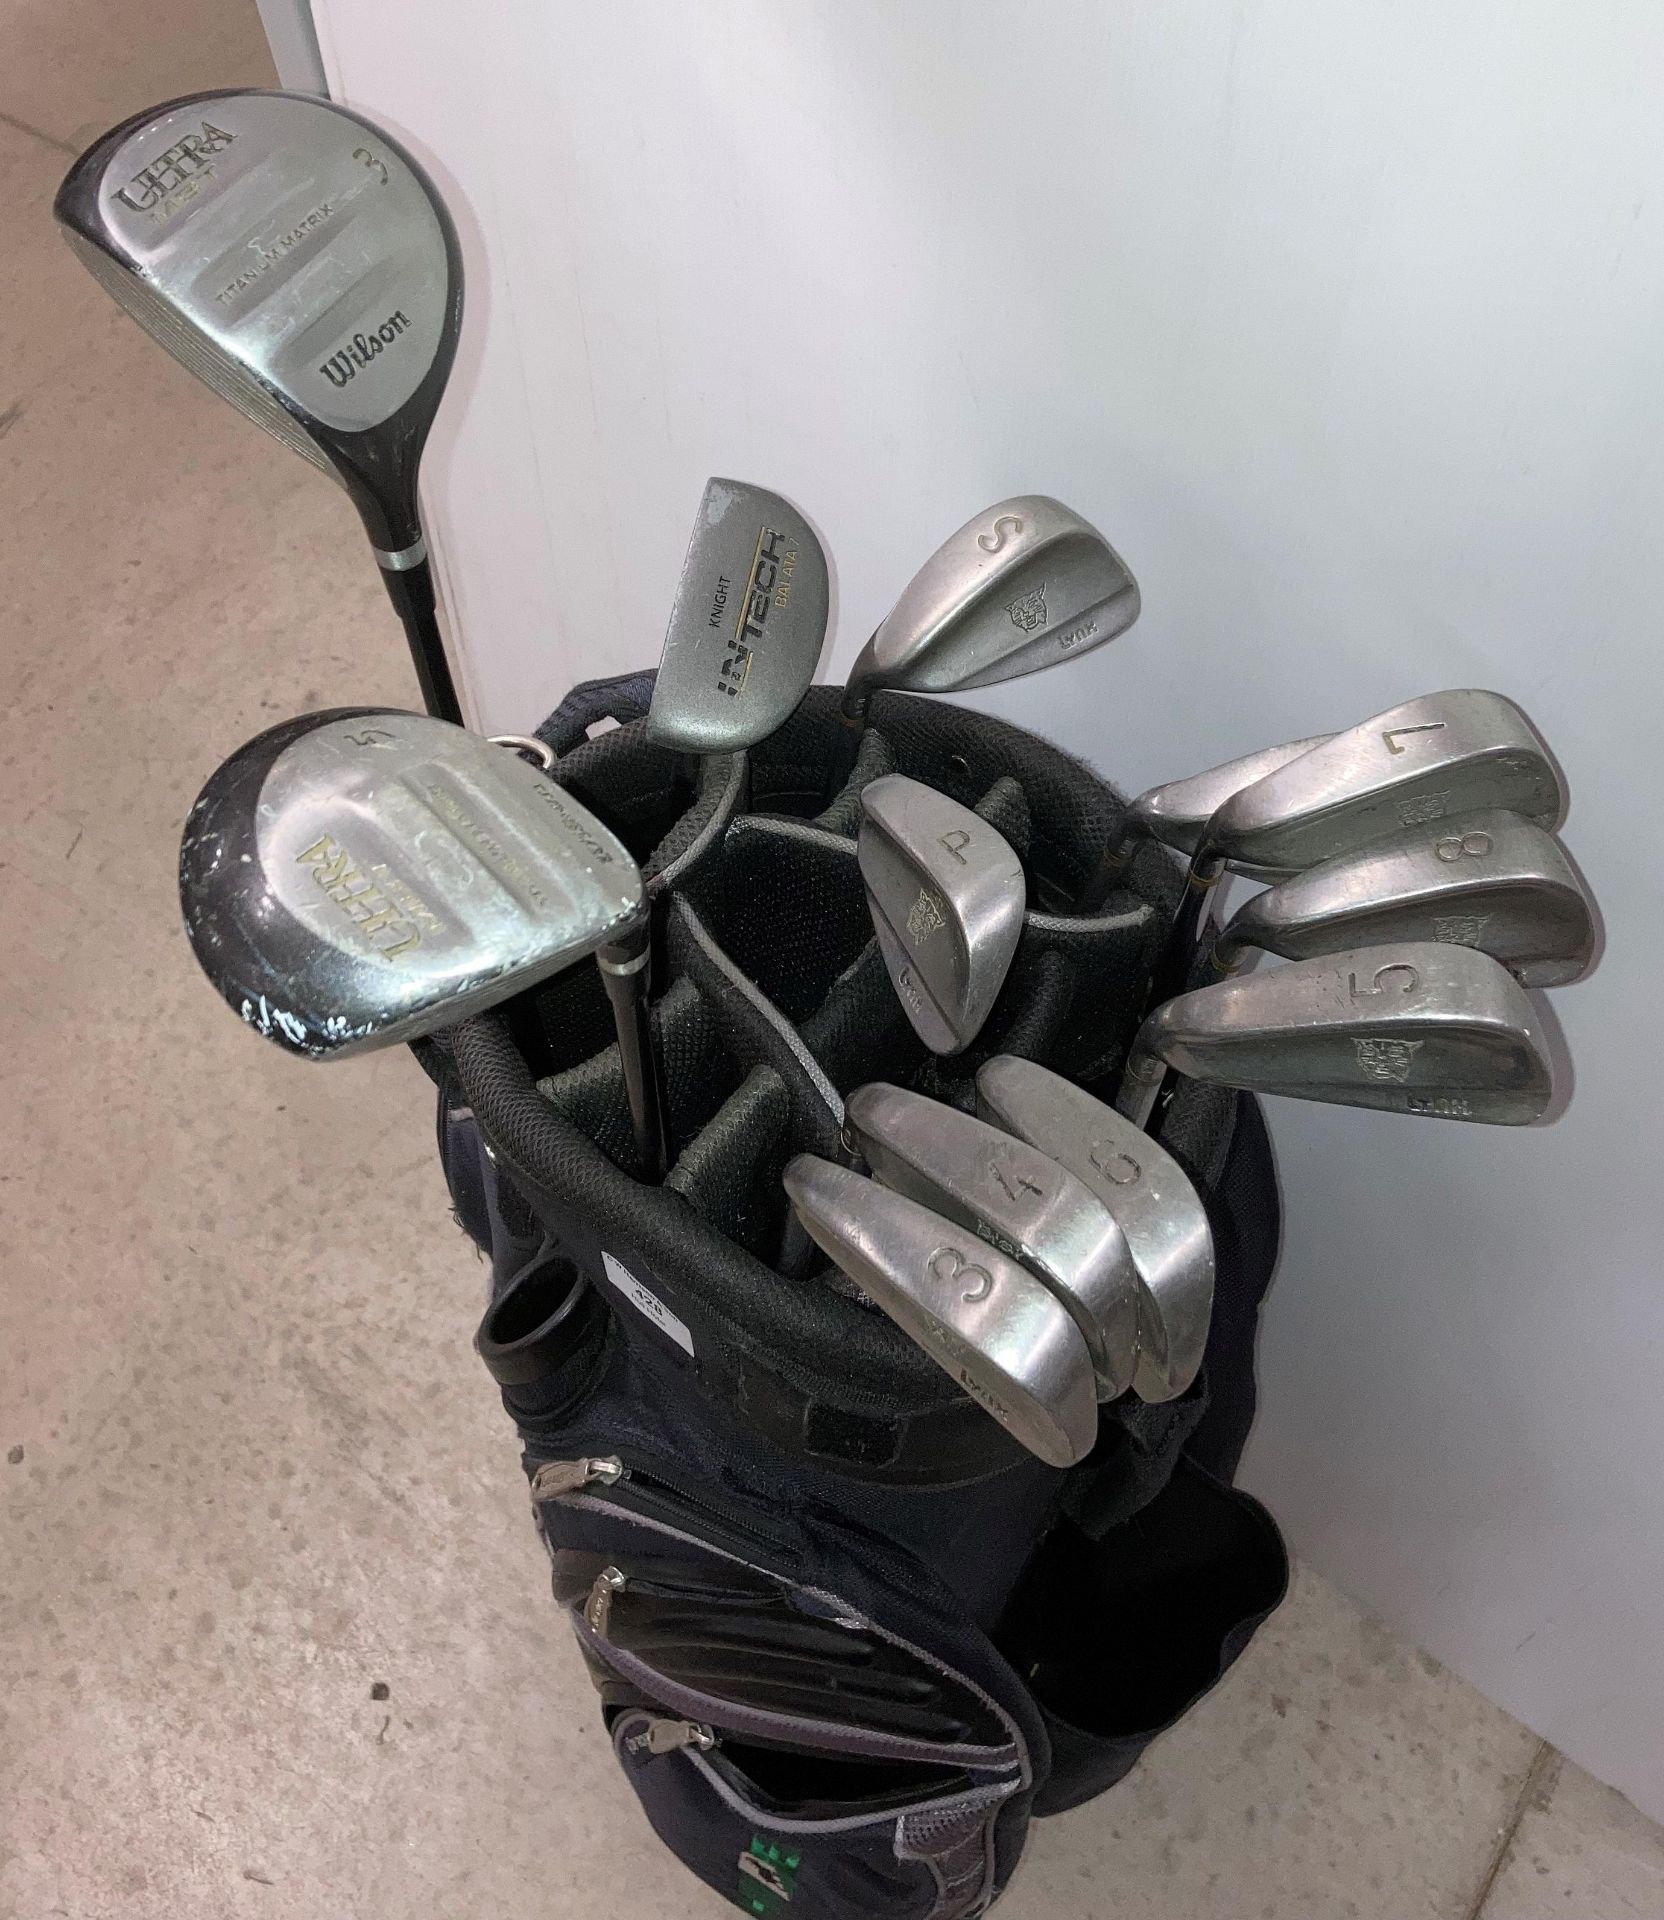 Set of Lynx left-handed irons, 3 iron to sandwedge complete with 2 Wilson Metals (3 and 5), - Image 2 of 2